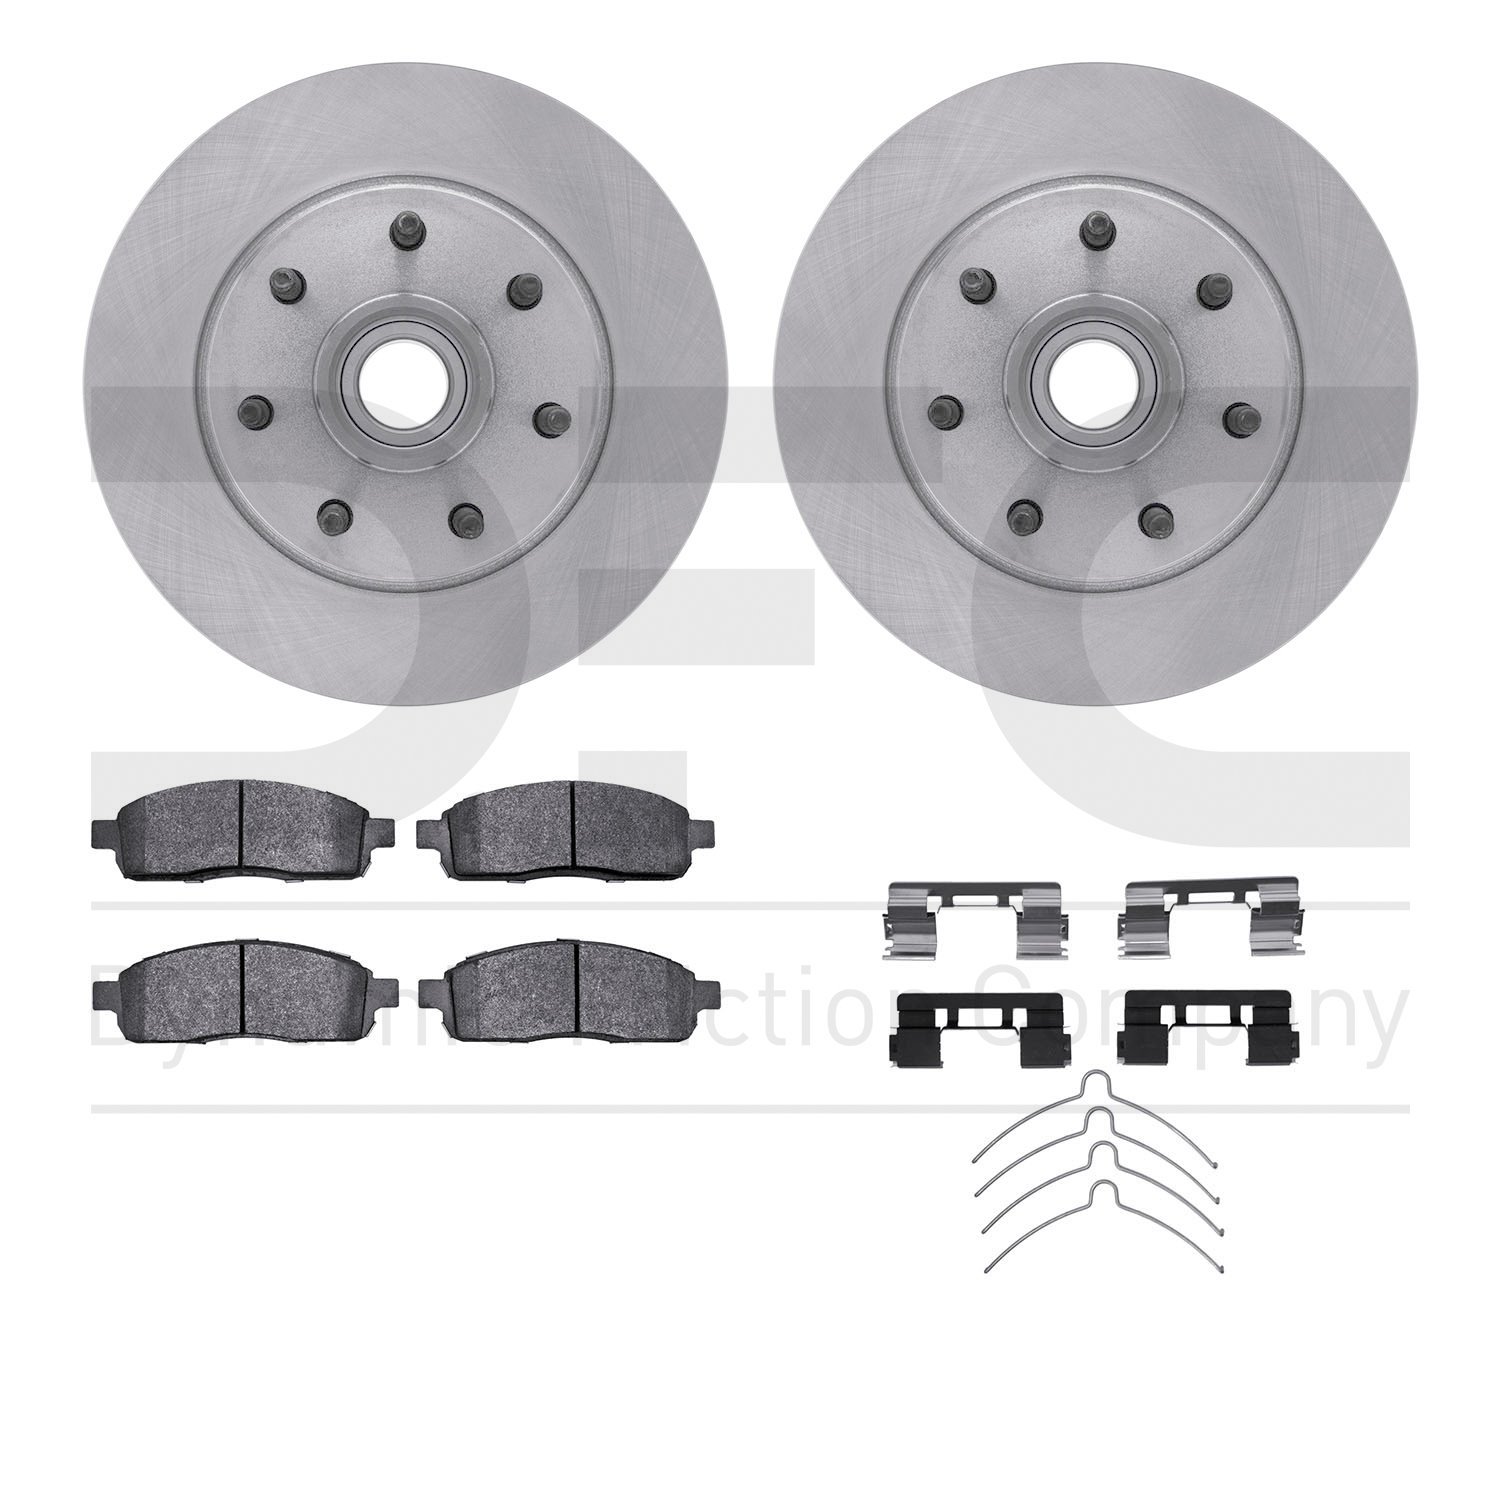 6412-54212 Brake Rotors with Ultimate-Duty Brake Pads Kit & Hardware, 2004-2008 Ford/Lincoln/Mercury/Mazda, Position: Front